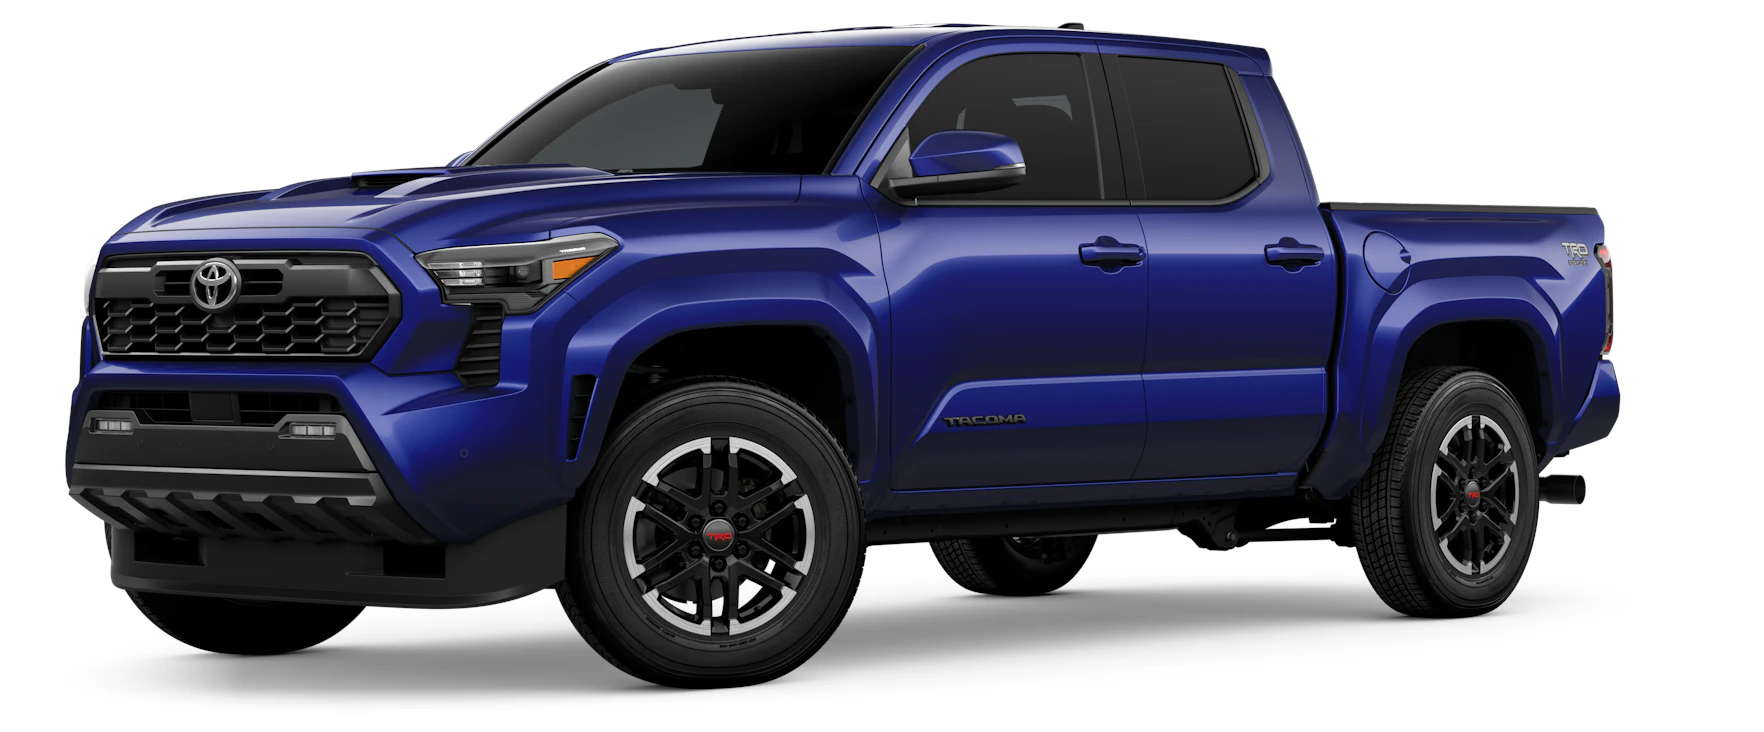 What Is the Sporty Trim of the Tacoma?